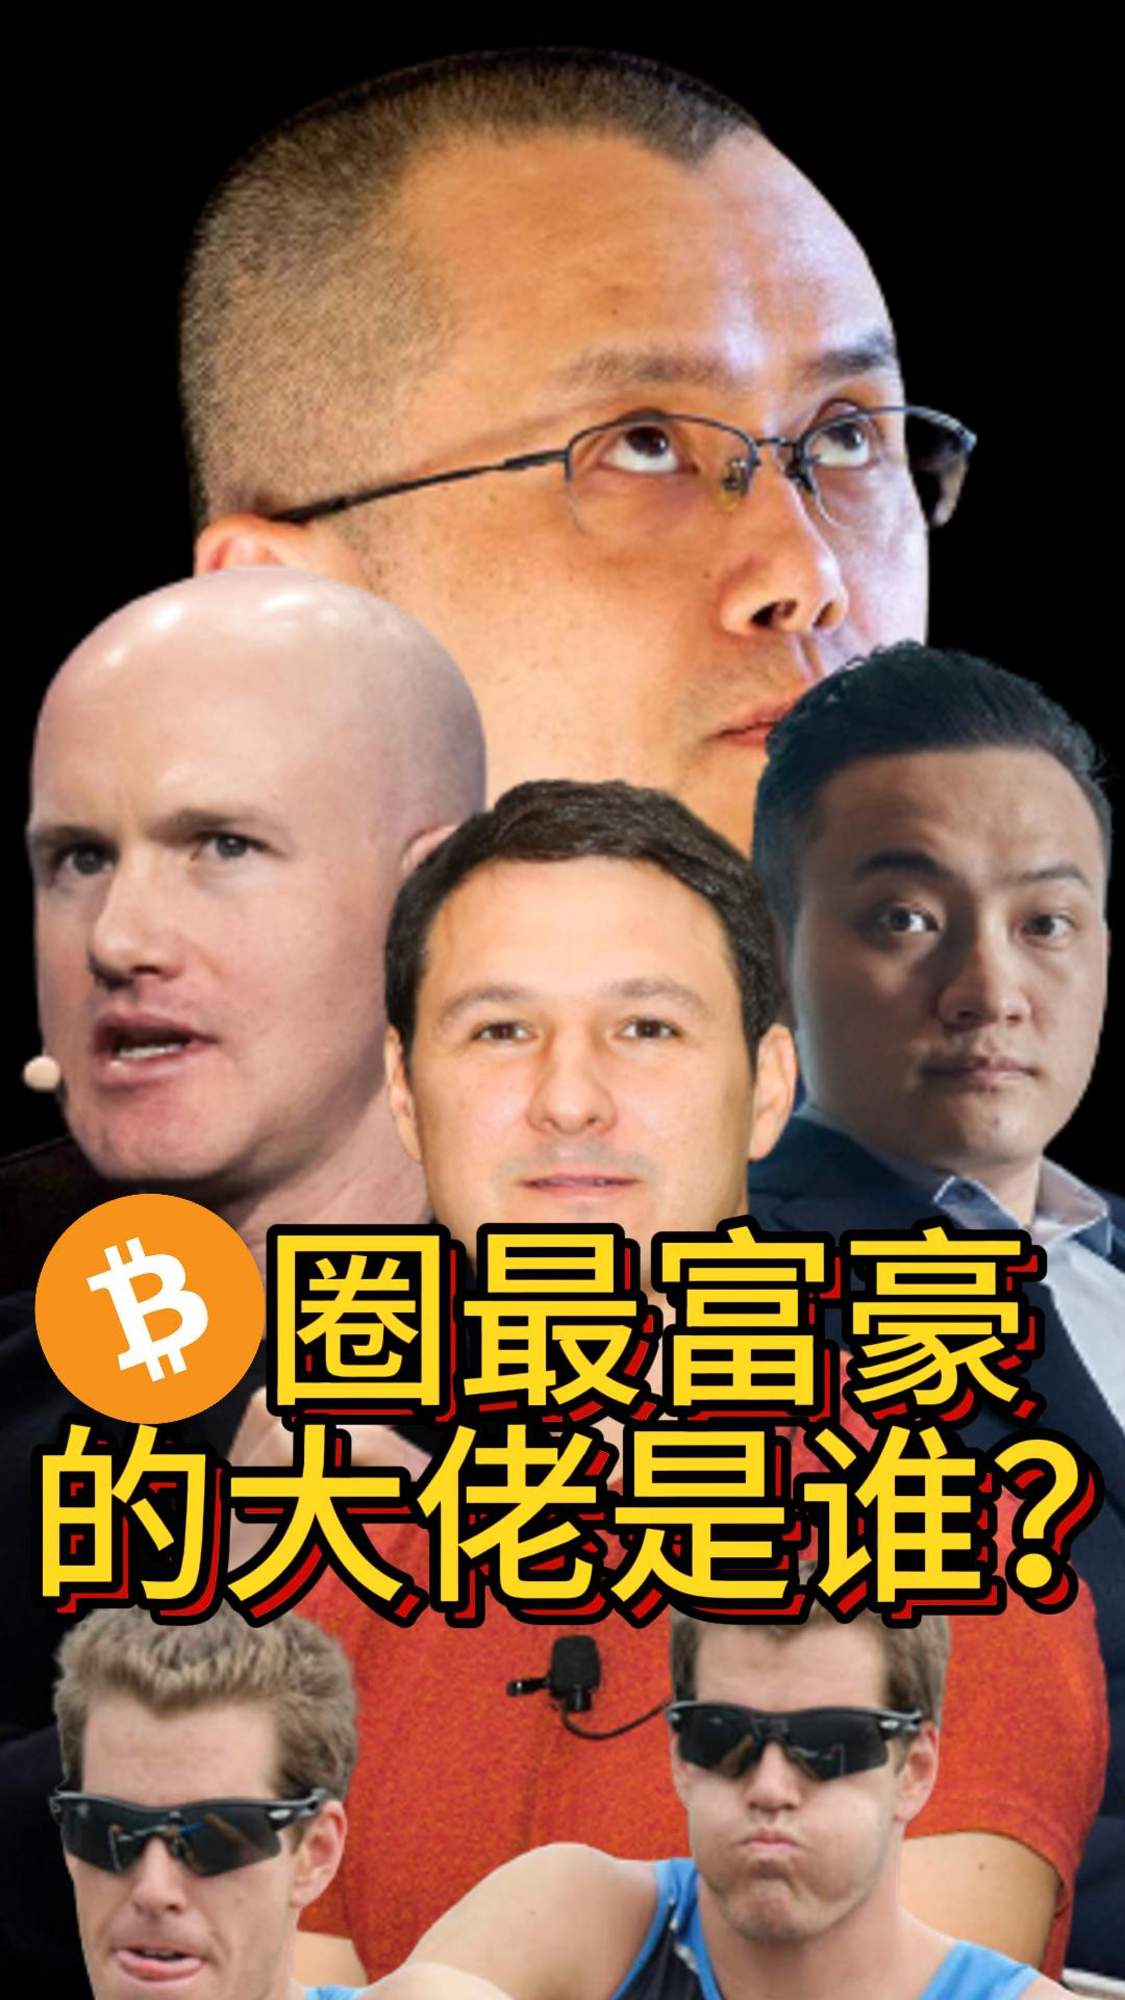 Who has the highest net worth in crypto? Justin Sun of Tron, Zhao Changpeng of Binance, Winklevoss twins of Gemini, Jed McCaleb of Stellar / Ripple / Mt Gox, Brian Armstrong of Coinbase?